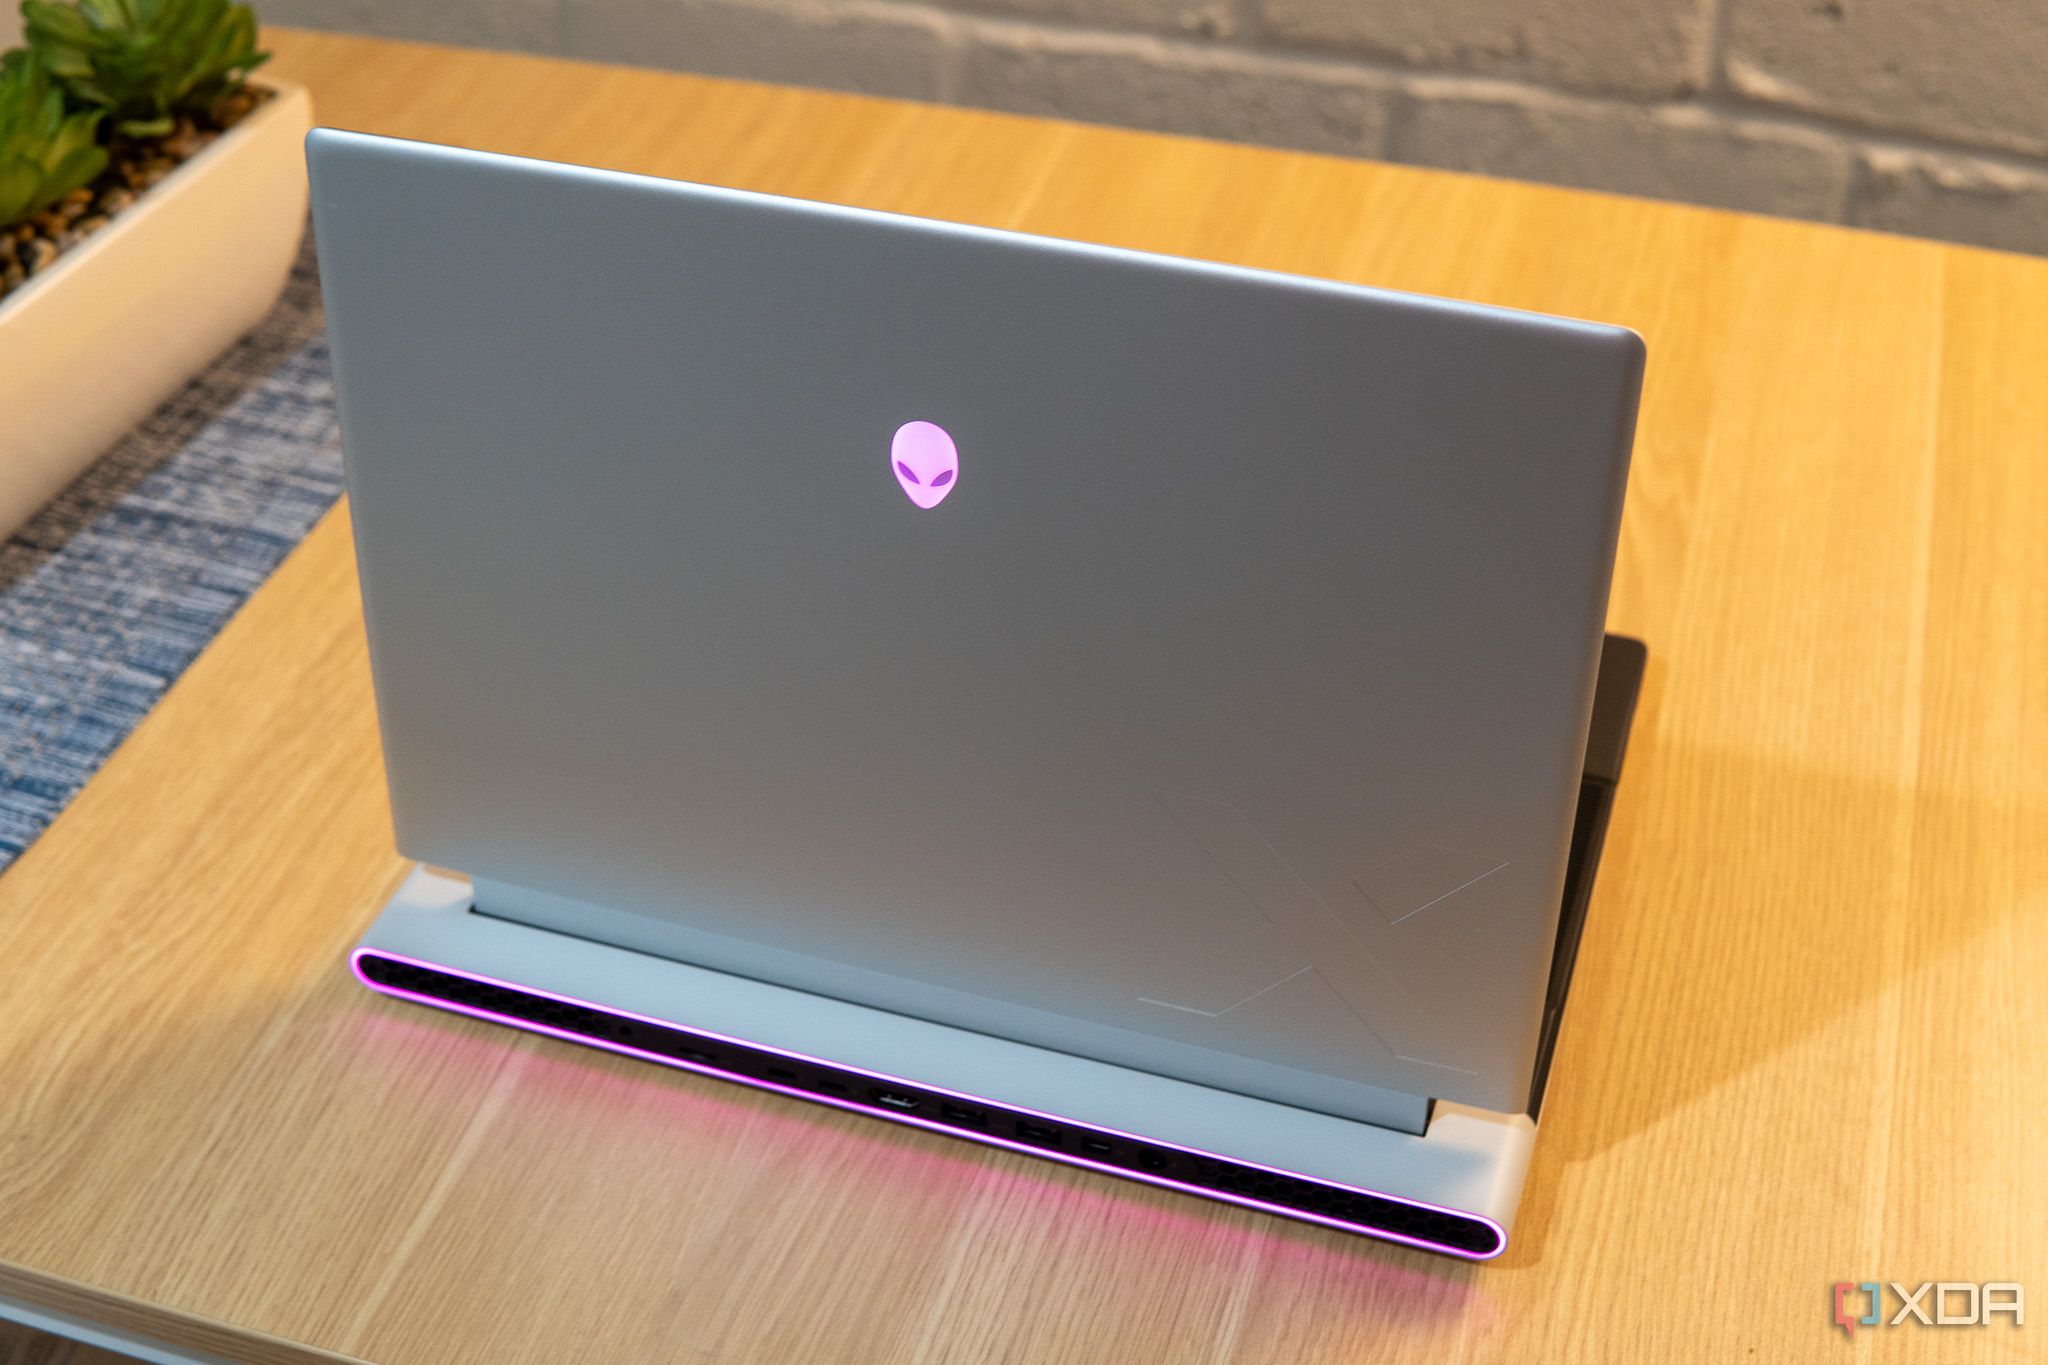 Rear angled view of the Alienware x16 on a wooden desk